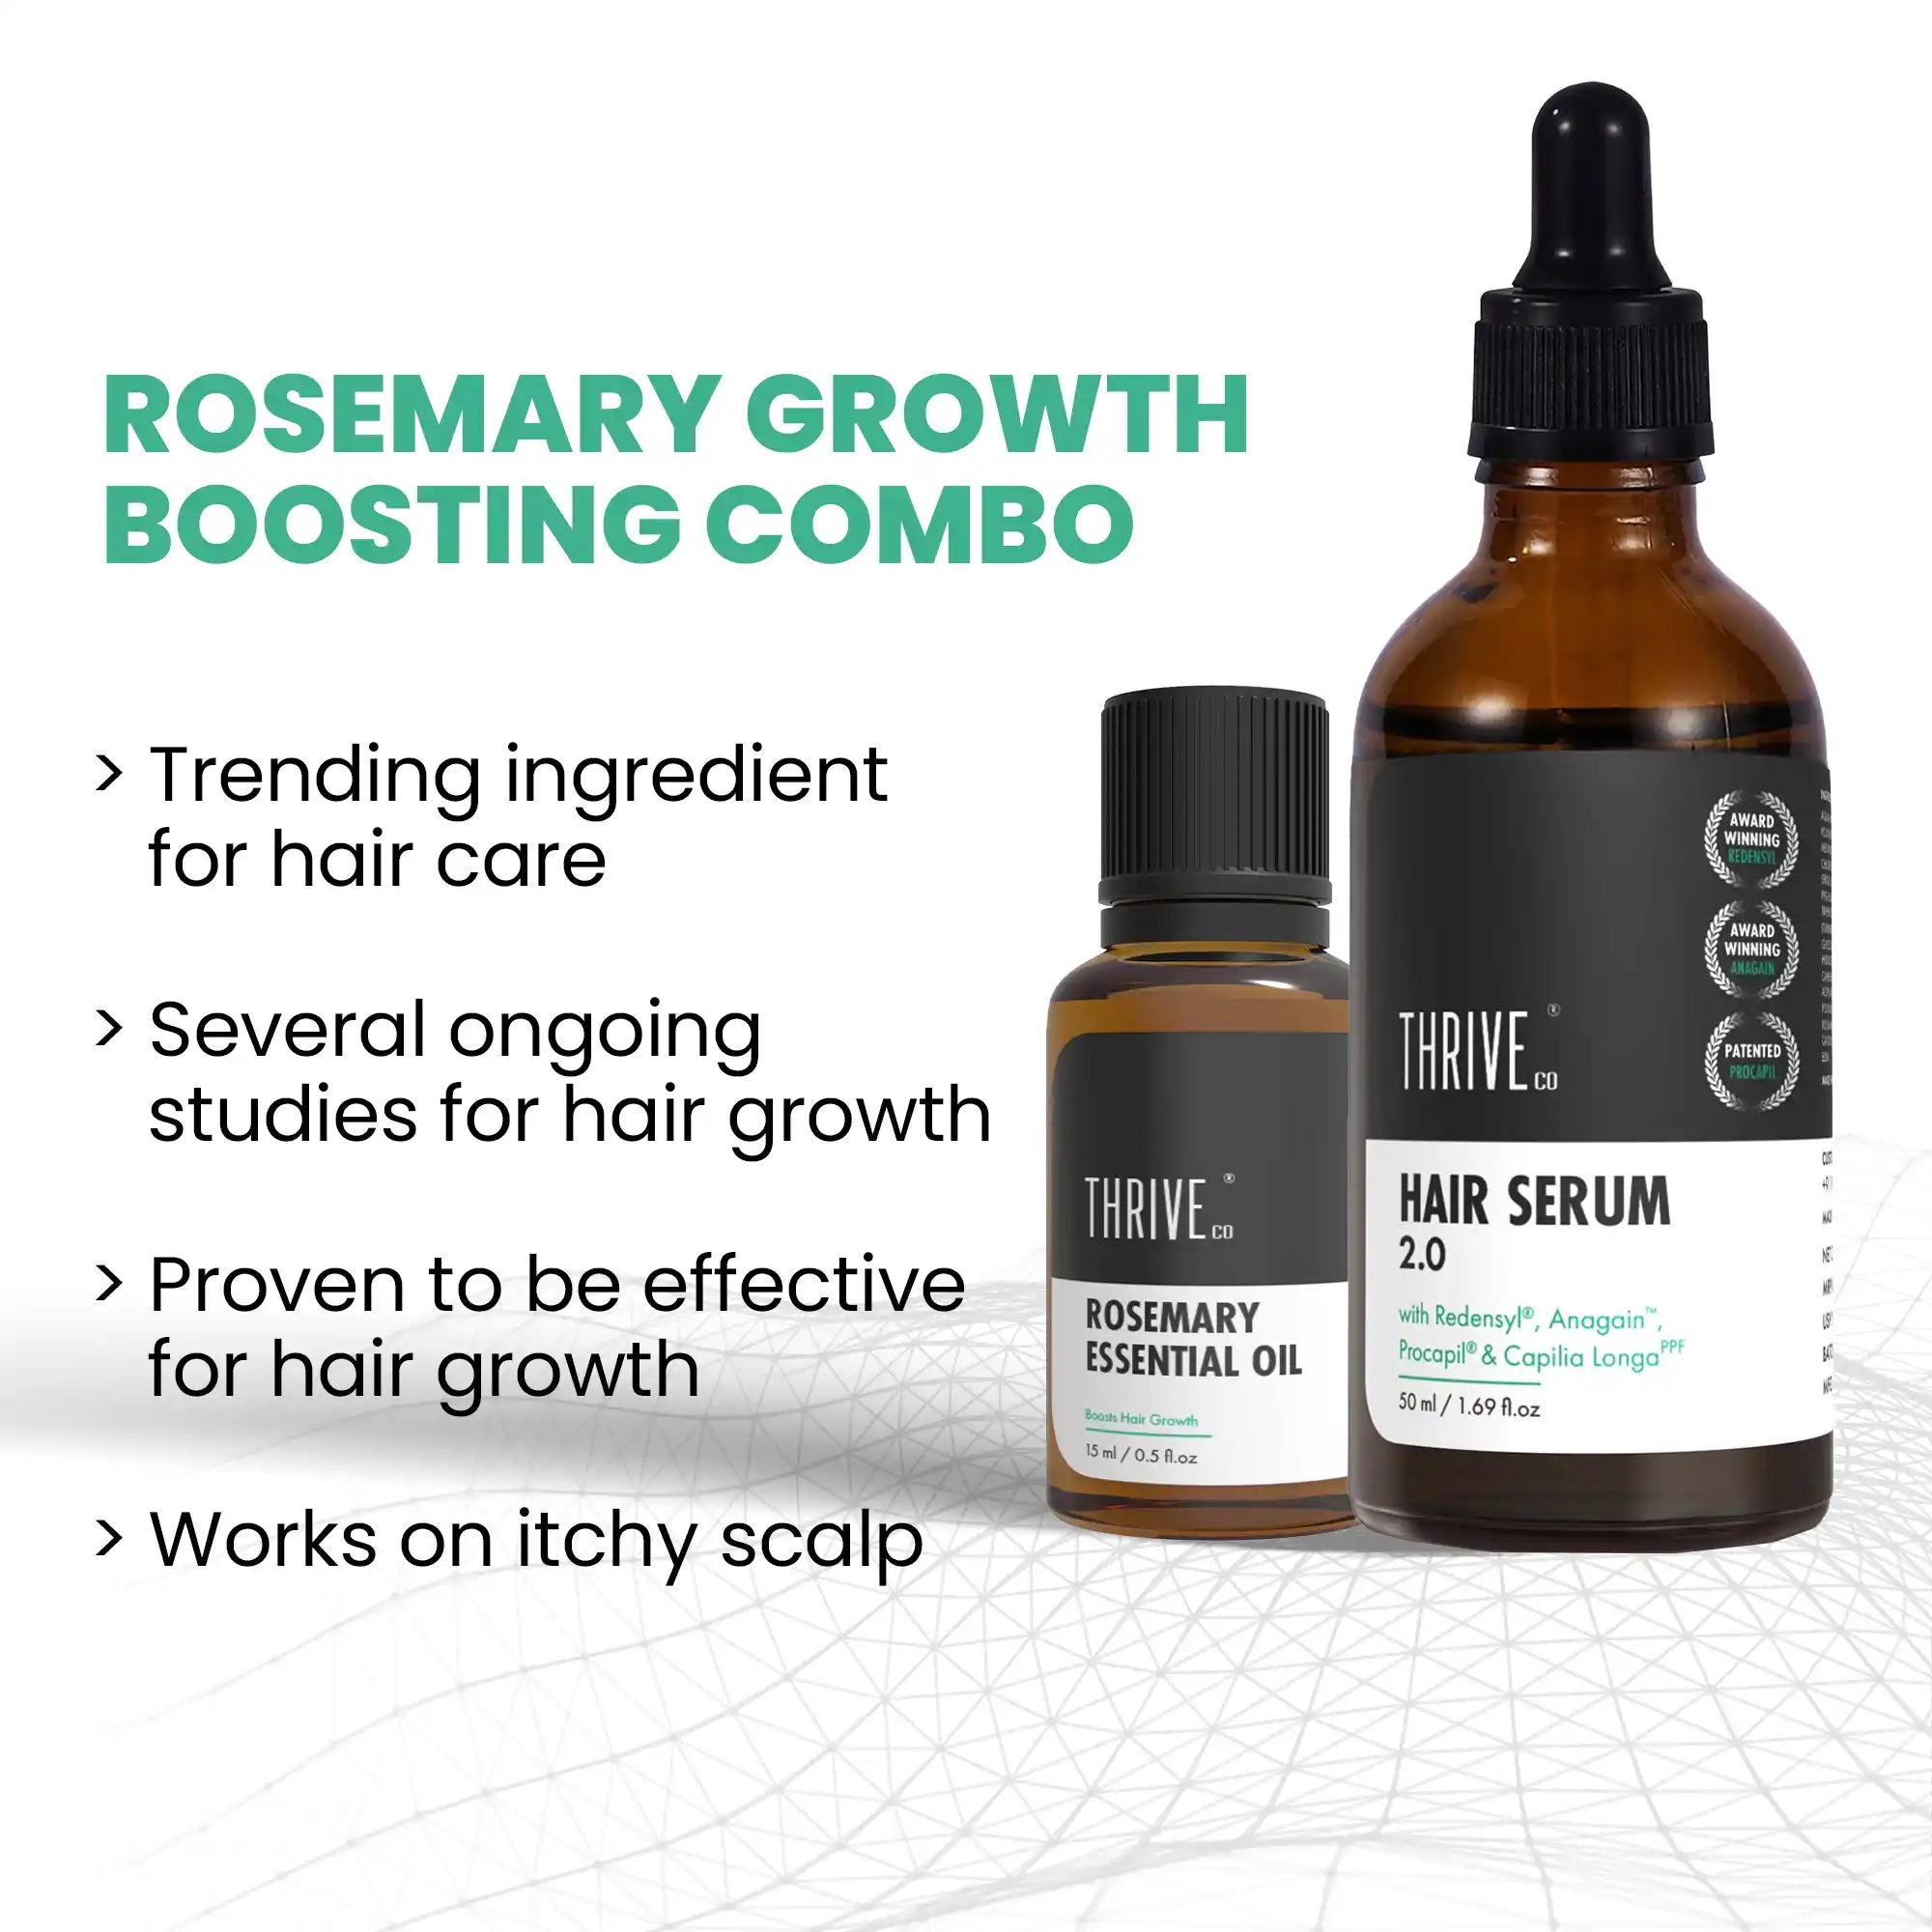 thriveco-rosemary-hair-growth-boosting-combo-of-oil-and-serum.webp__PID:7b7e155b-df3e-4276-b5c6-df6095e7280b